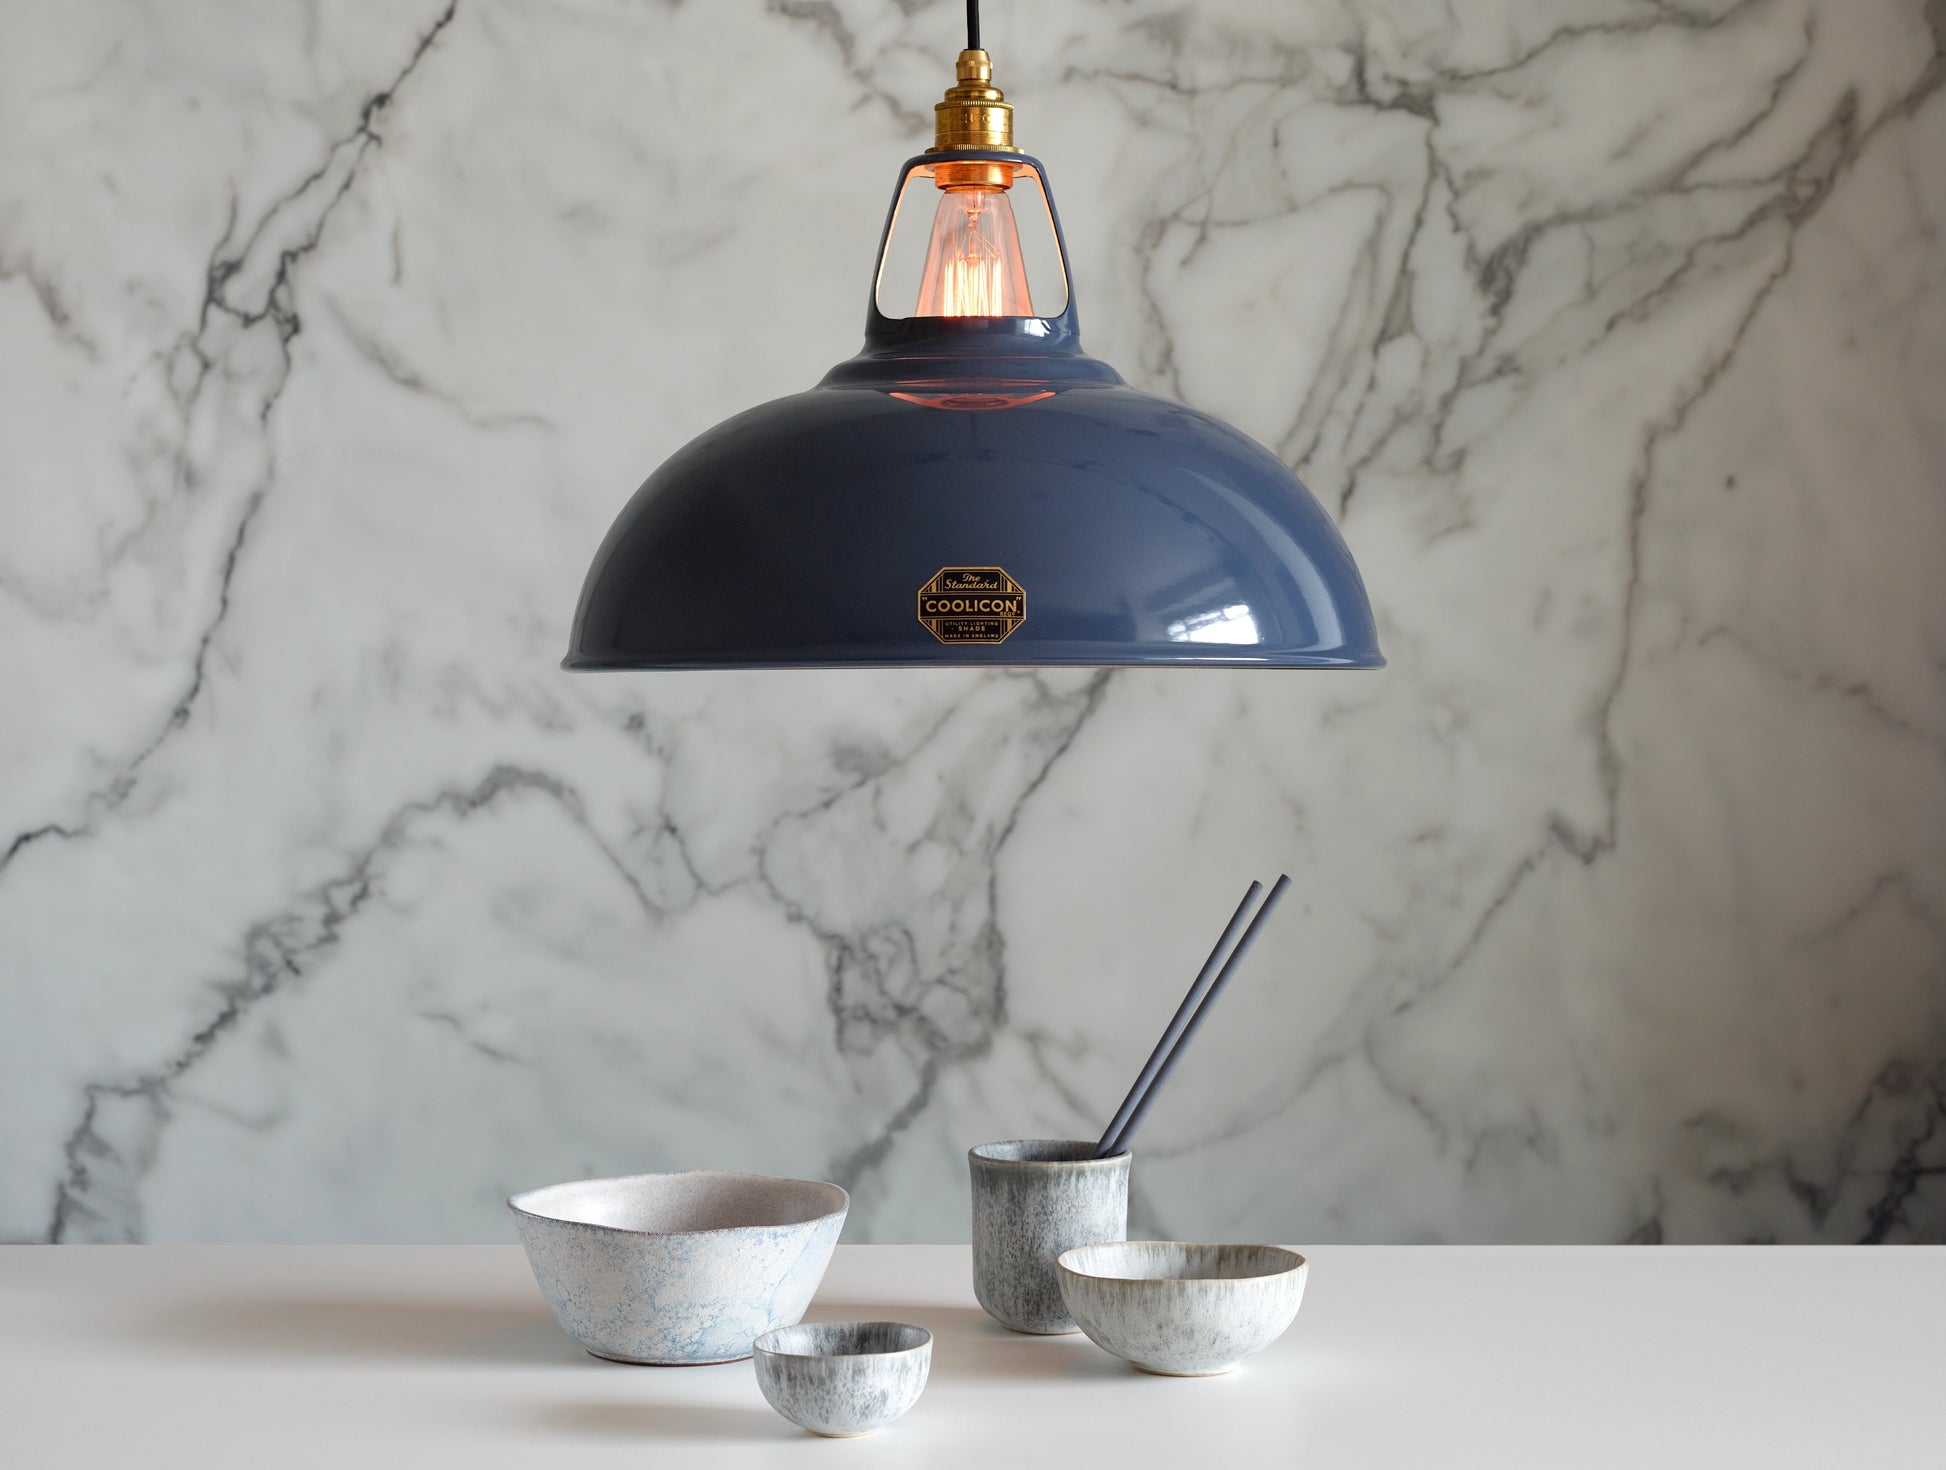 A Large Coolicon Selvedge blue lampshade with a Signature Brass pendant set hanging above a table with a set of white and blue bowls of different sizes and a pair of blue chopsticks. The background is a marble wallpaper.